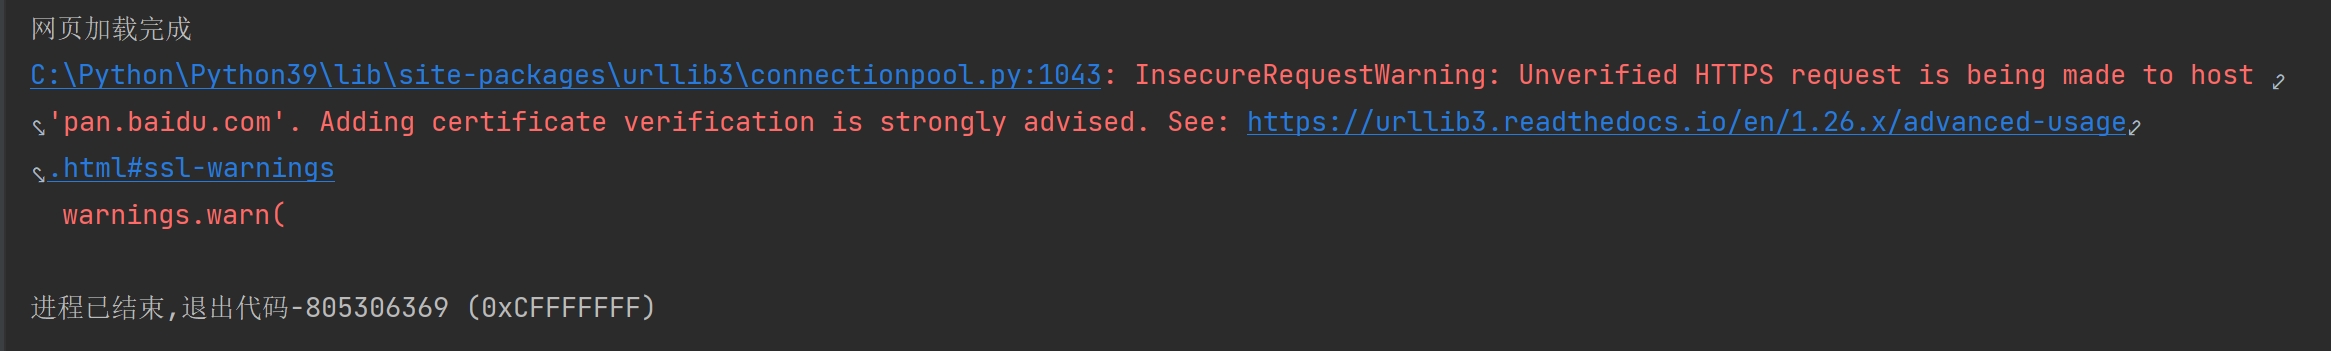 Python requests 异常InsecureRequestWarning: Unverified HTTPS request is being made to host '***domain'. Adding certificate verification is strongly advised. See...解决 1